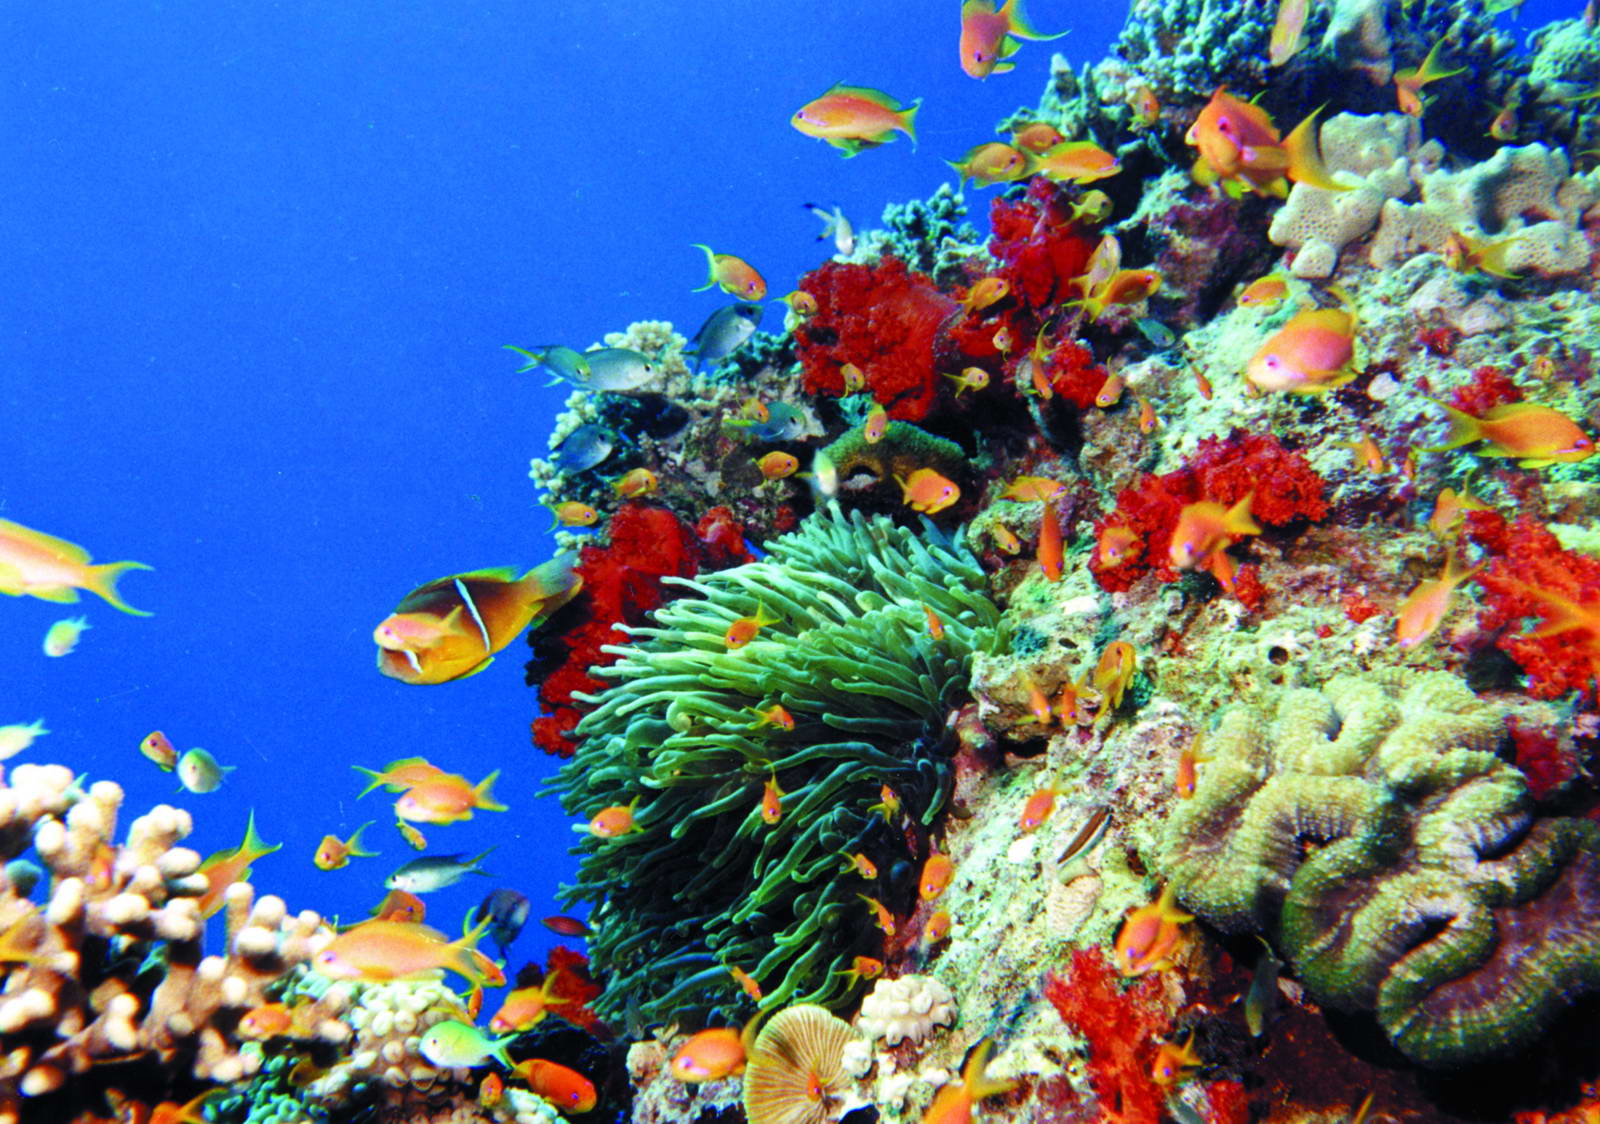 Coral reefs in the Gulf of Aqaba